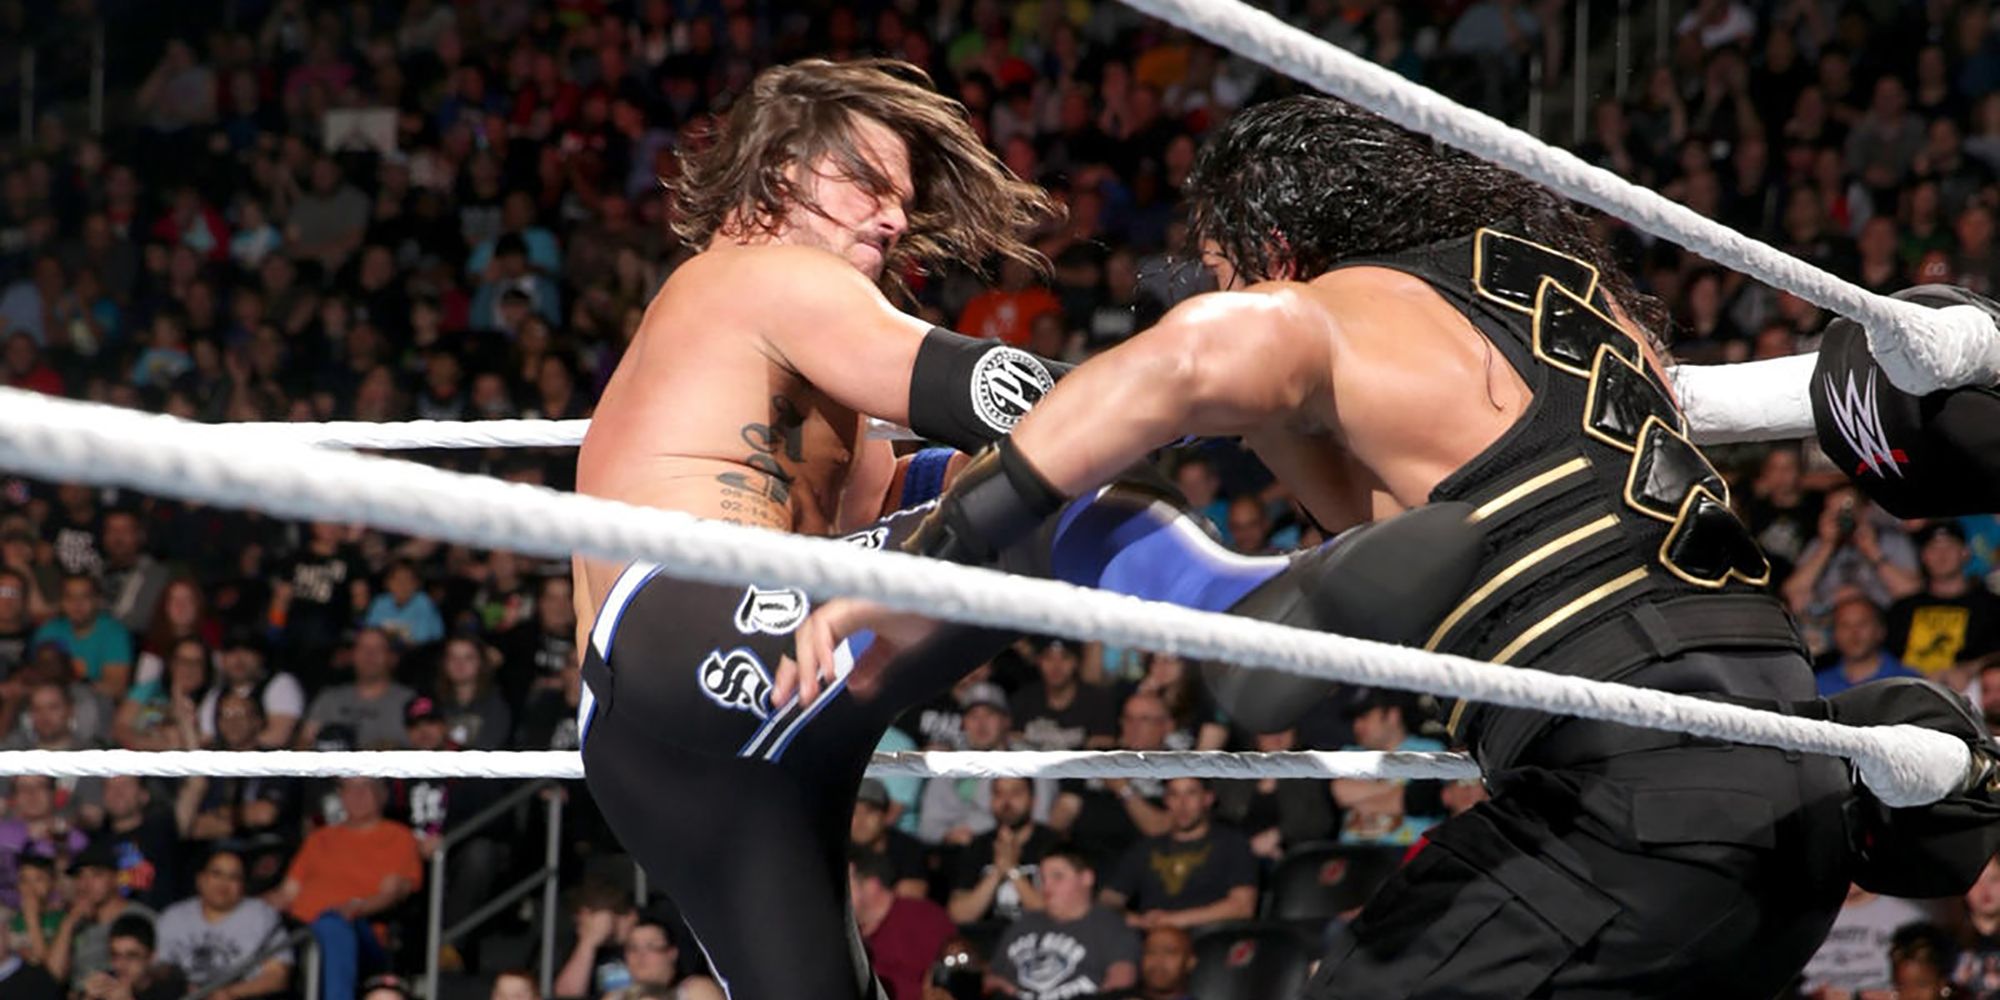 Roman Reigns vs AJ Styles At Extreme Rules 2016